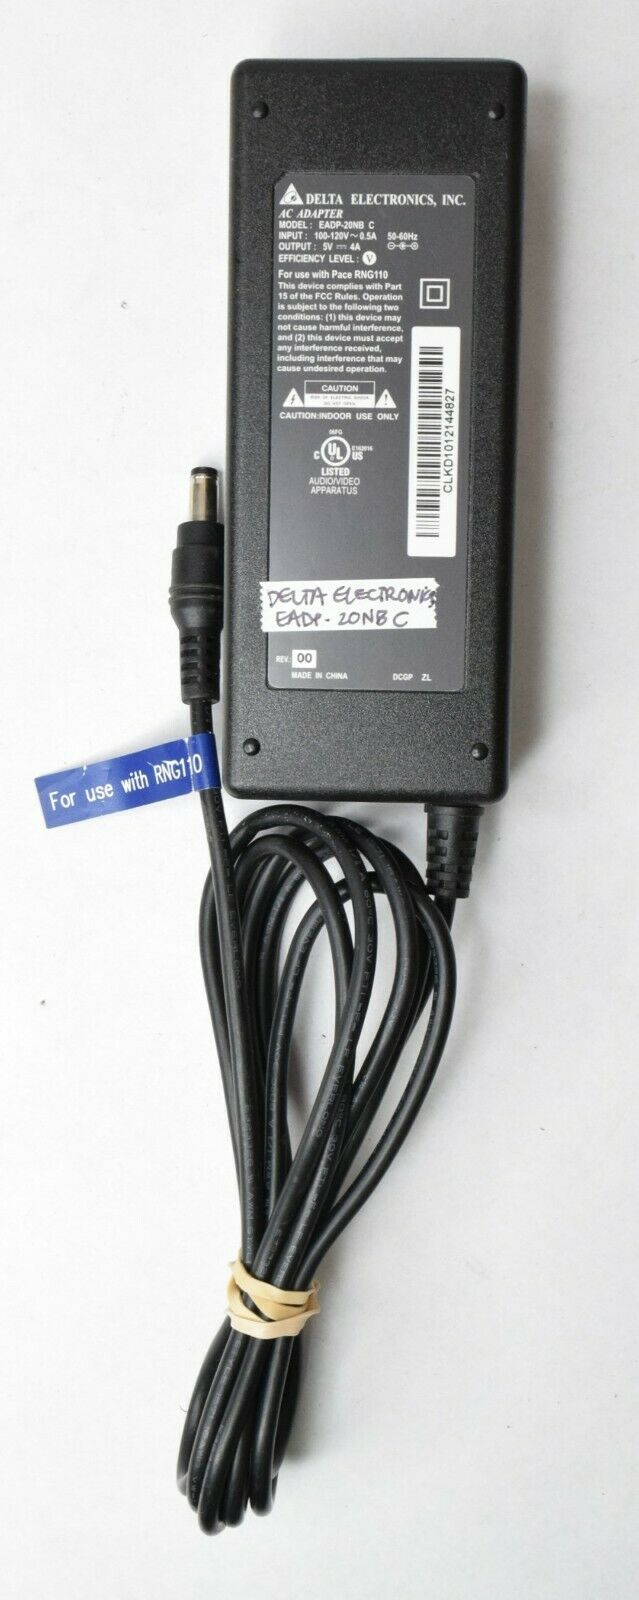 Delta Electronics AC Adapter Power Supply Unit EADP-20NB C 5V 4A Type: Adapter Brand: Delta Electronics Output Voltag